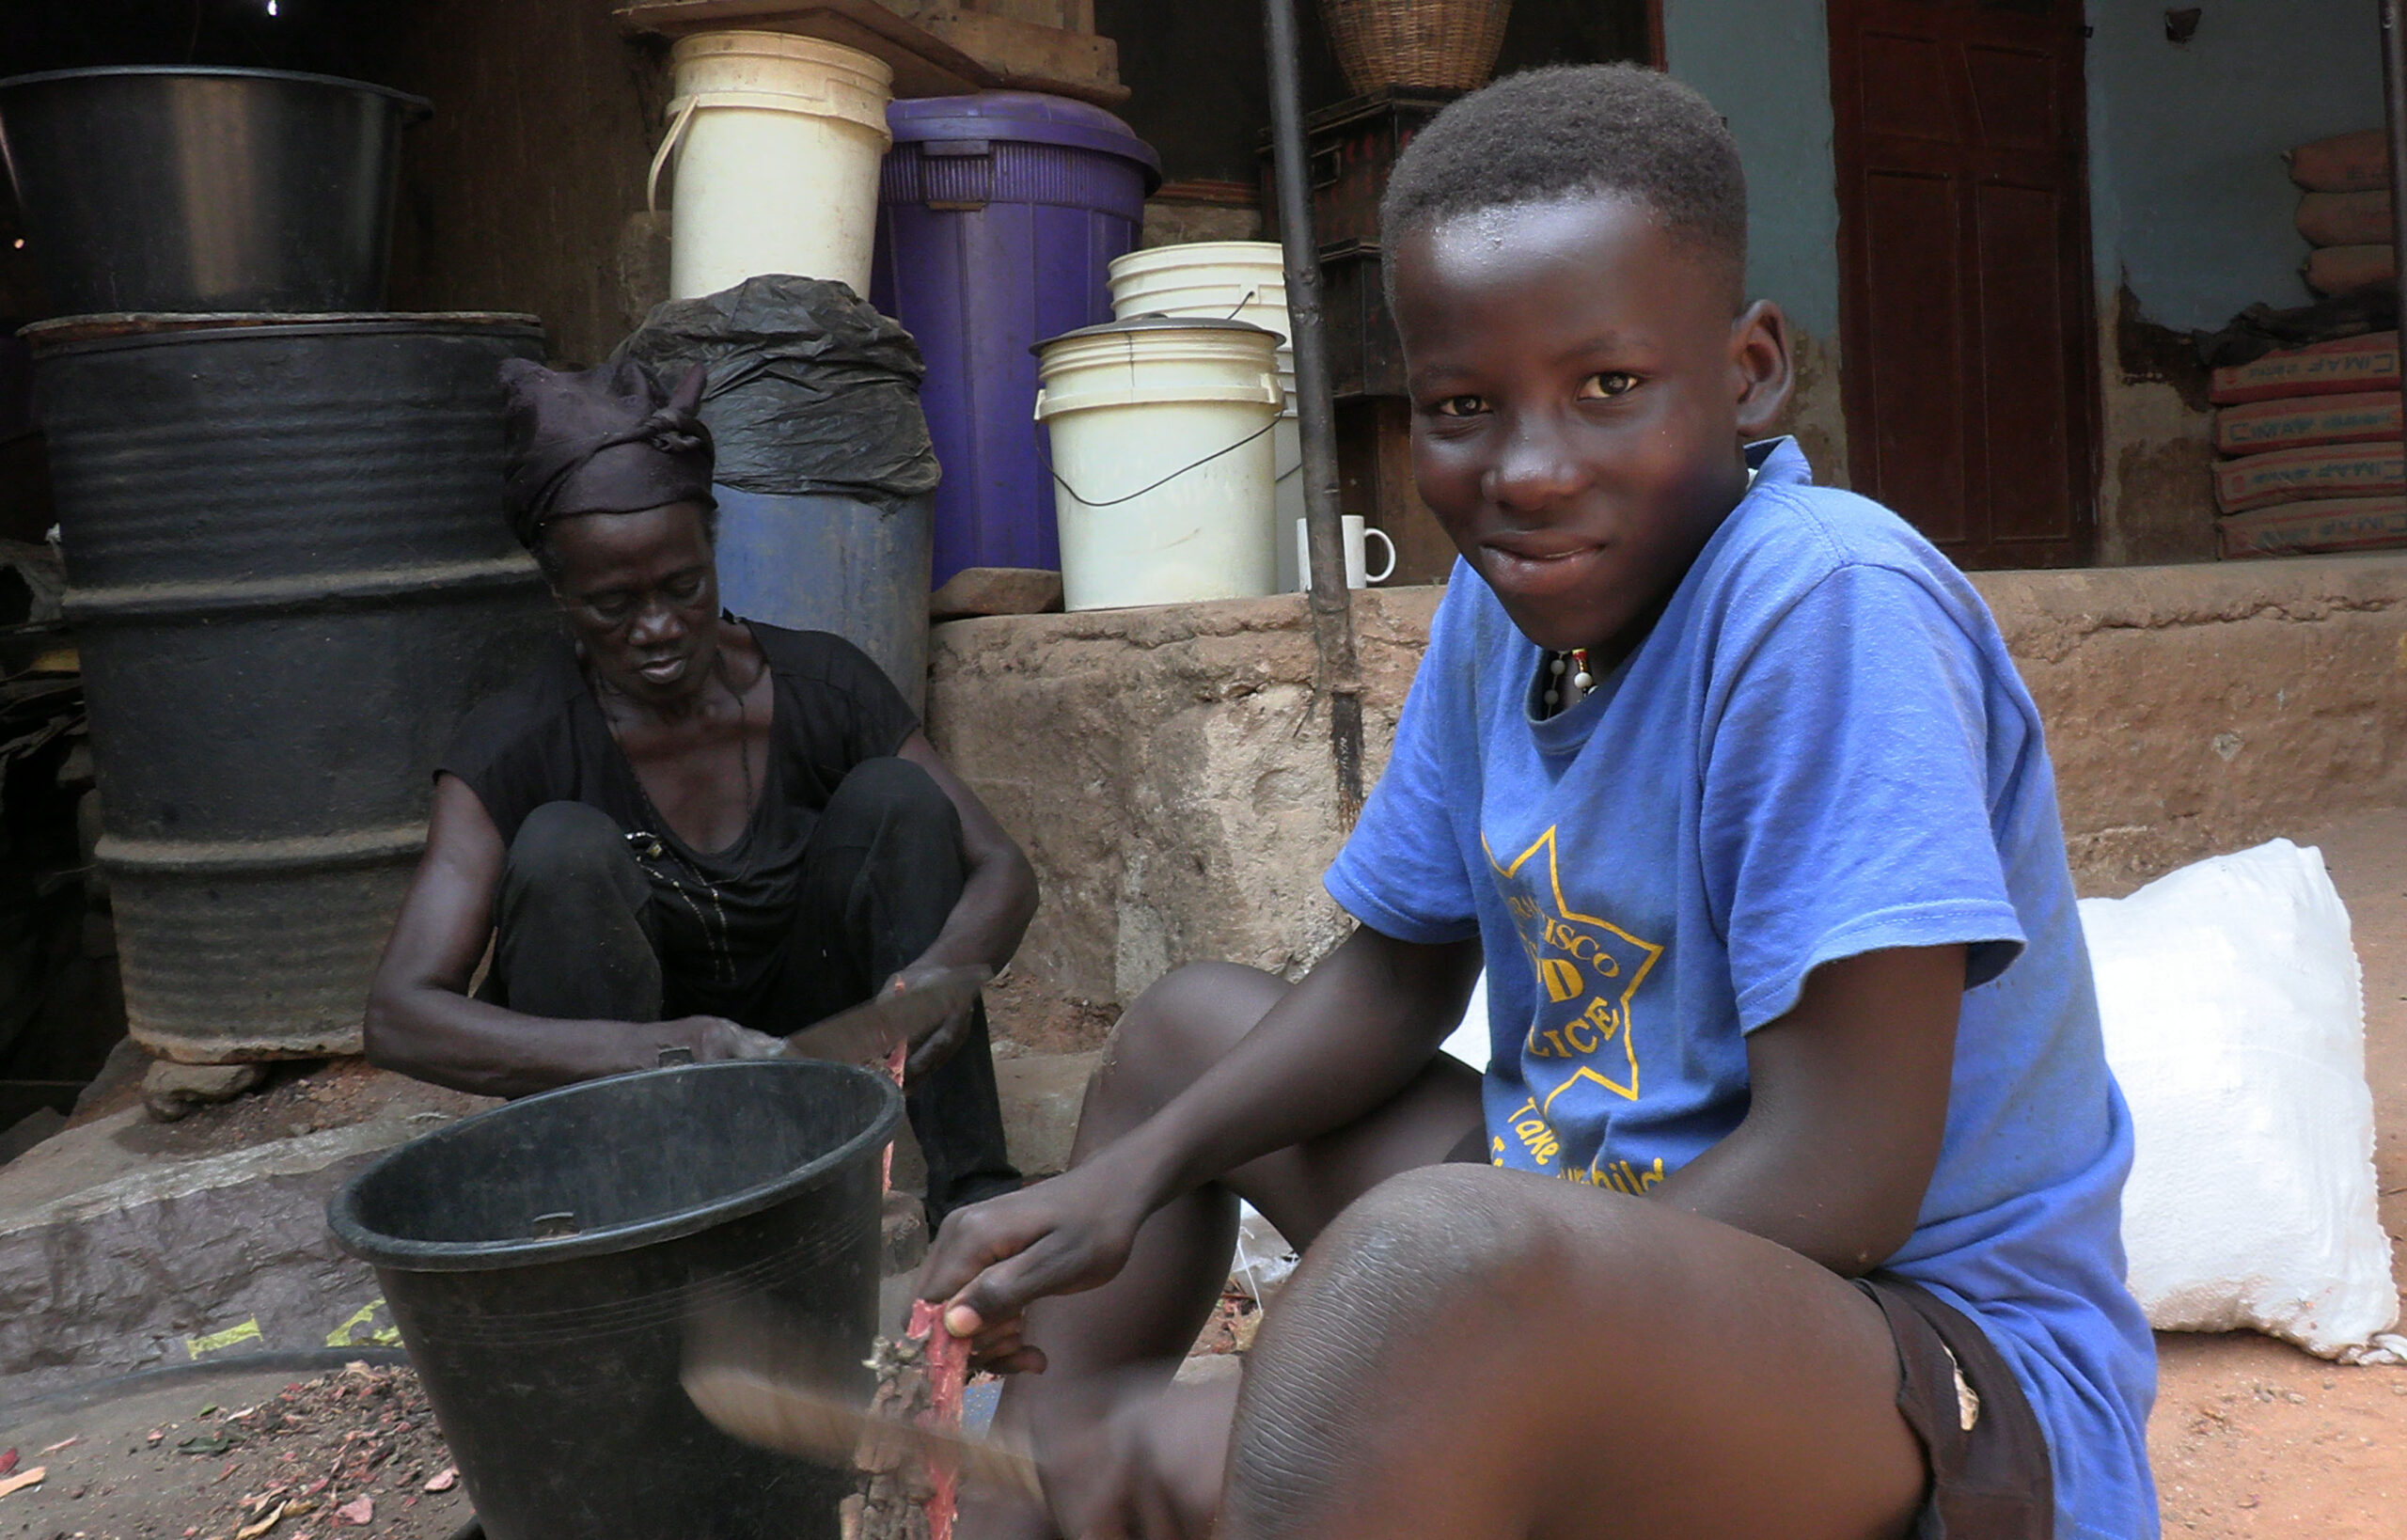 A LITTLE BOY in Kumasi helps with the family Adinkra cloth business by cutting tree bark used to create dye.